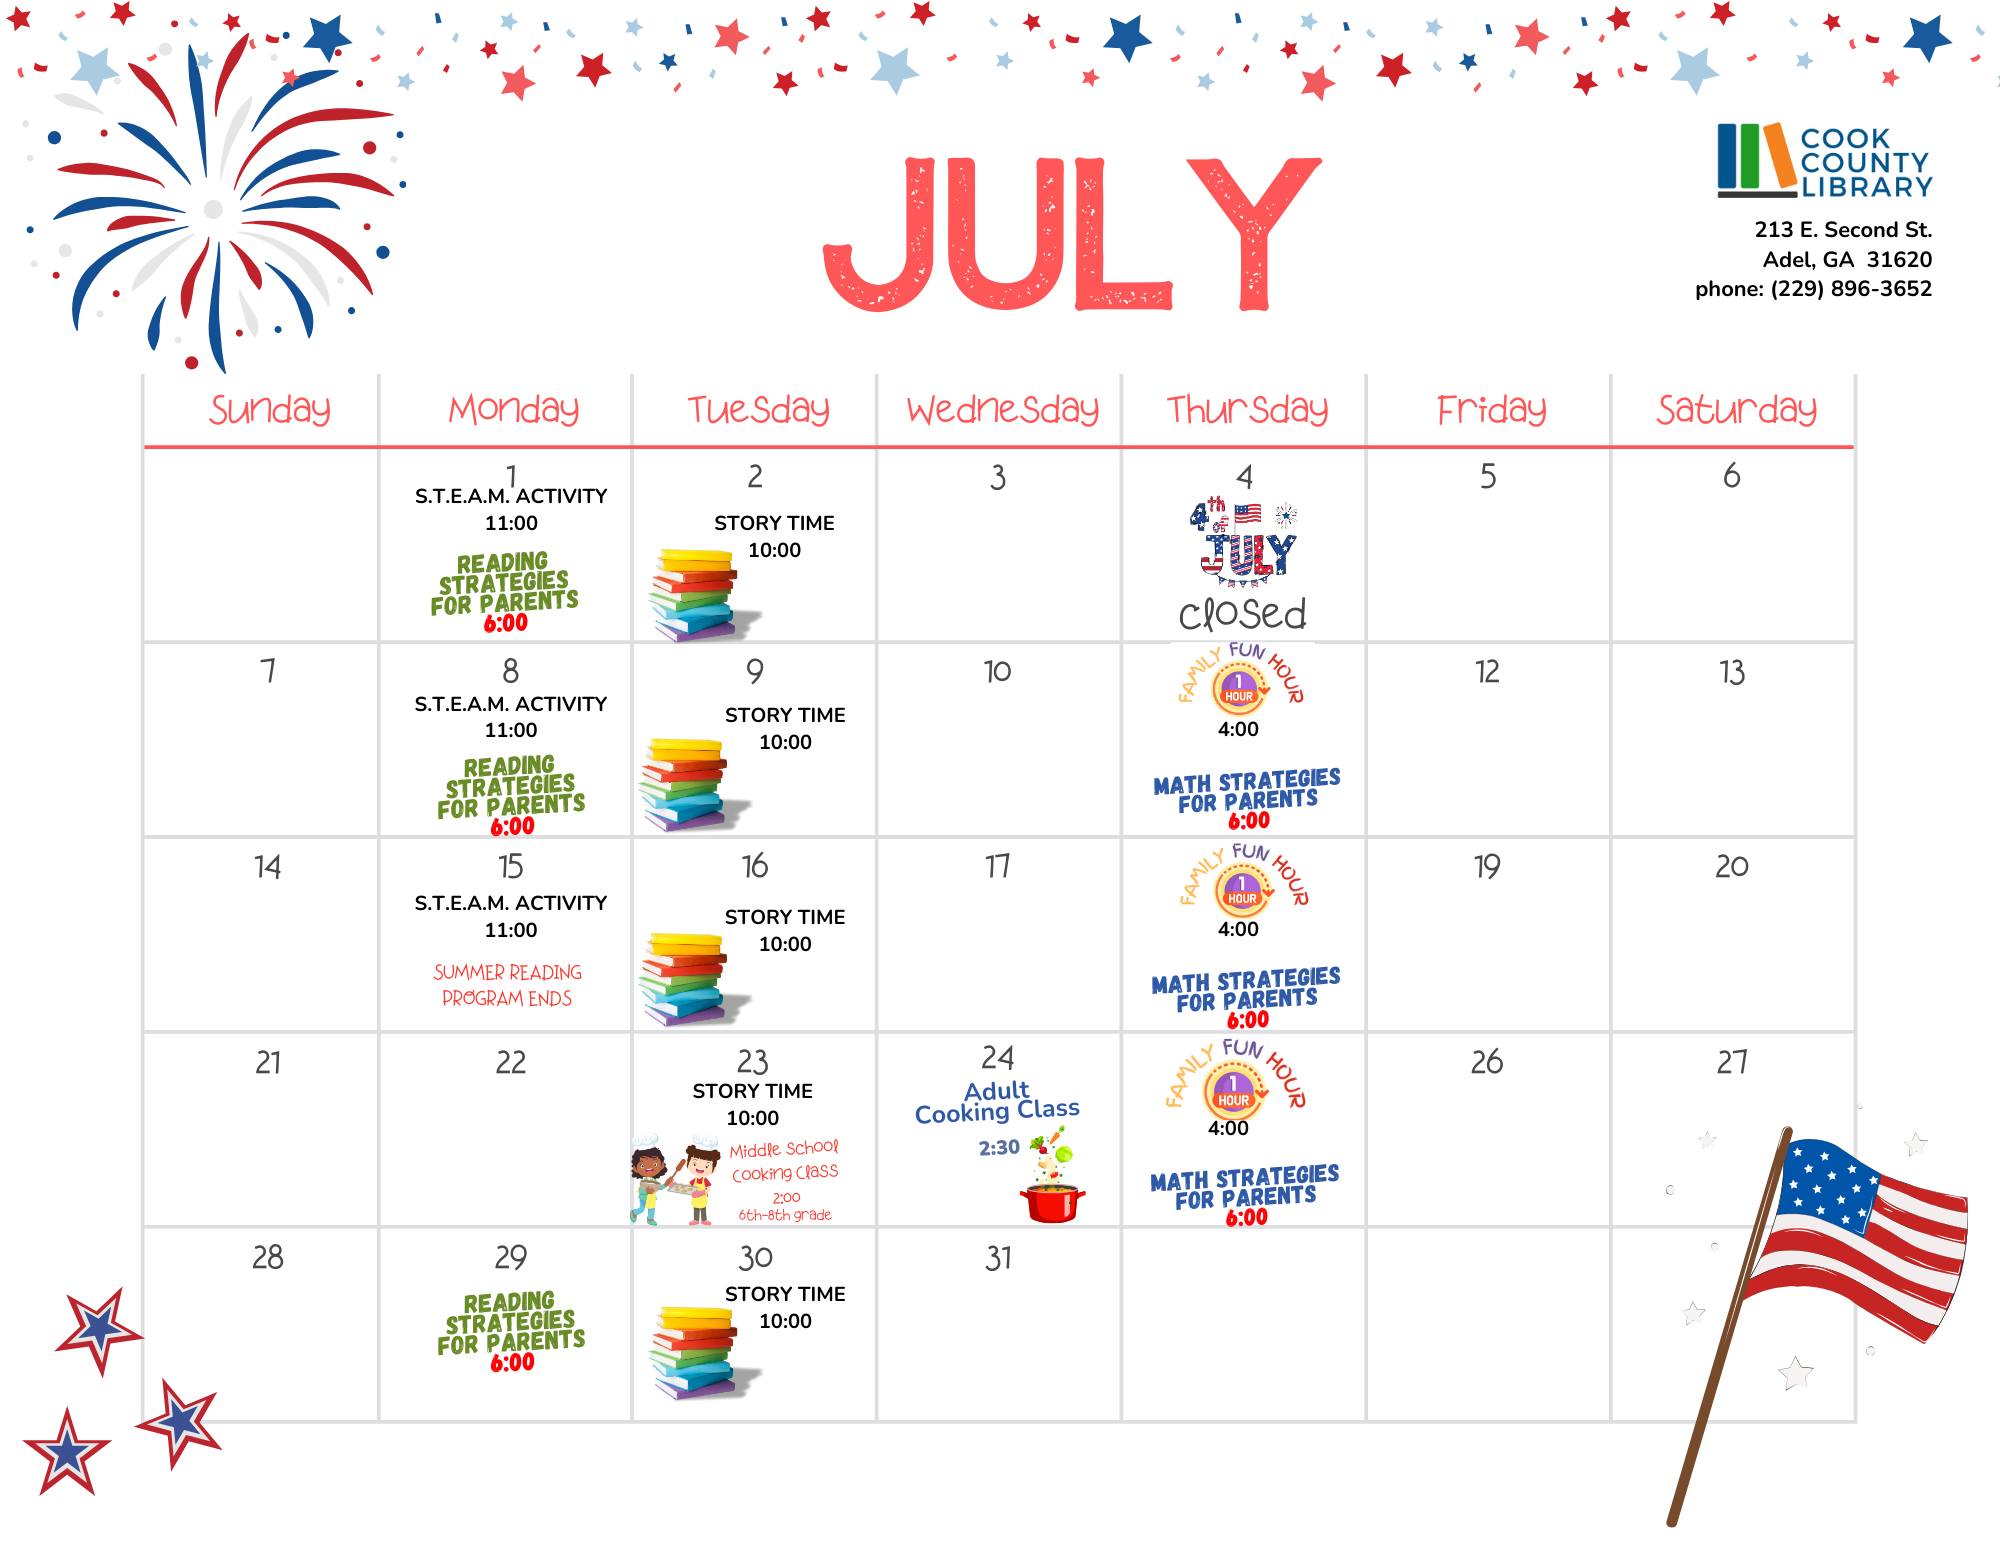 July Calendar for Cook County Library